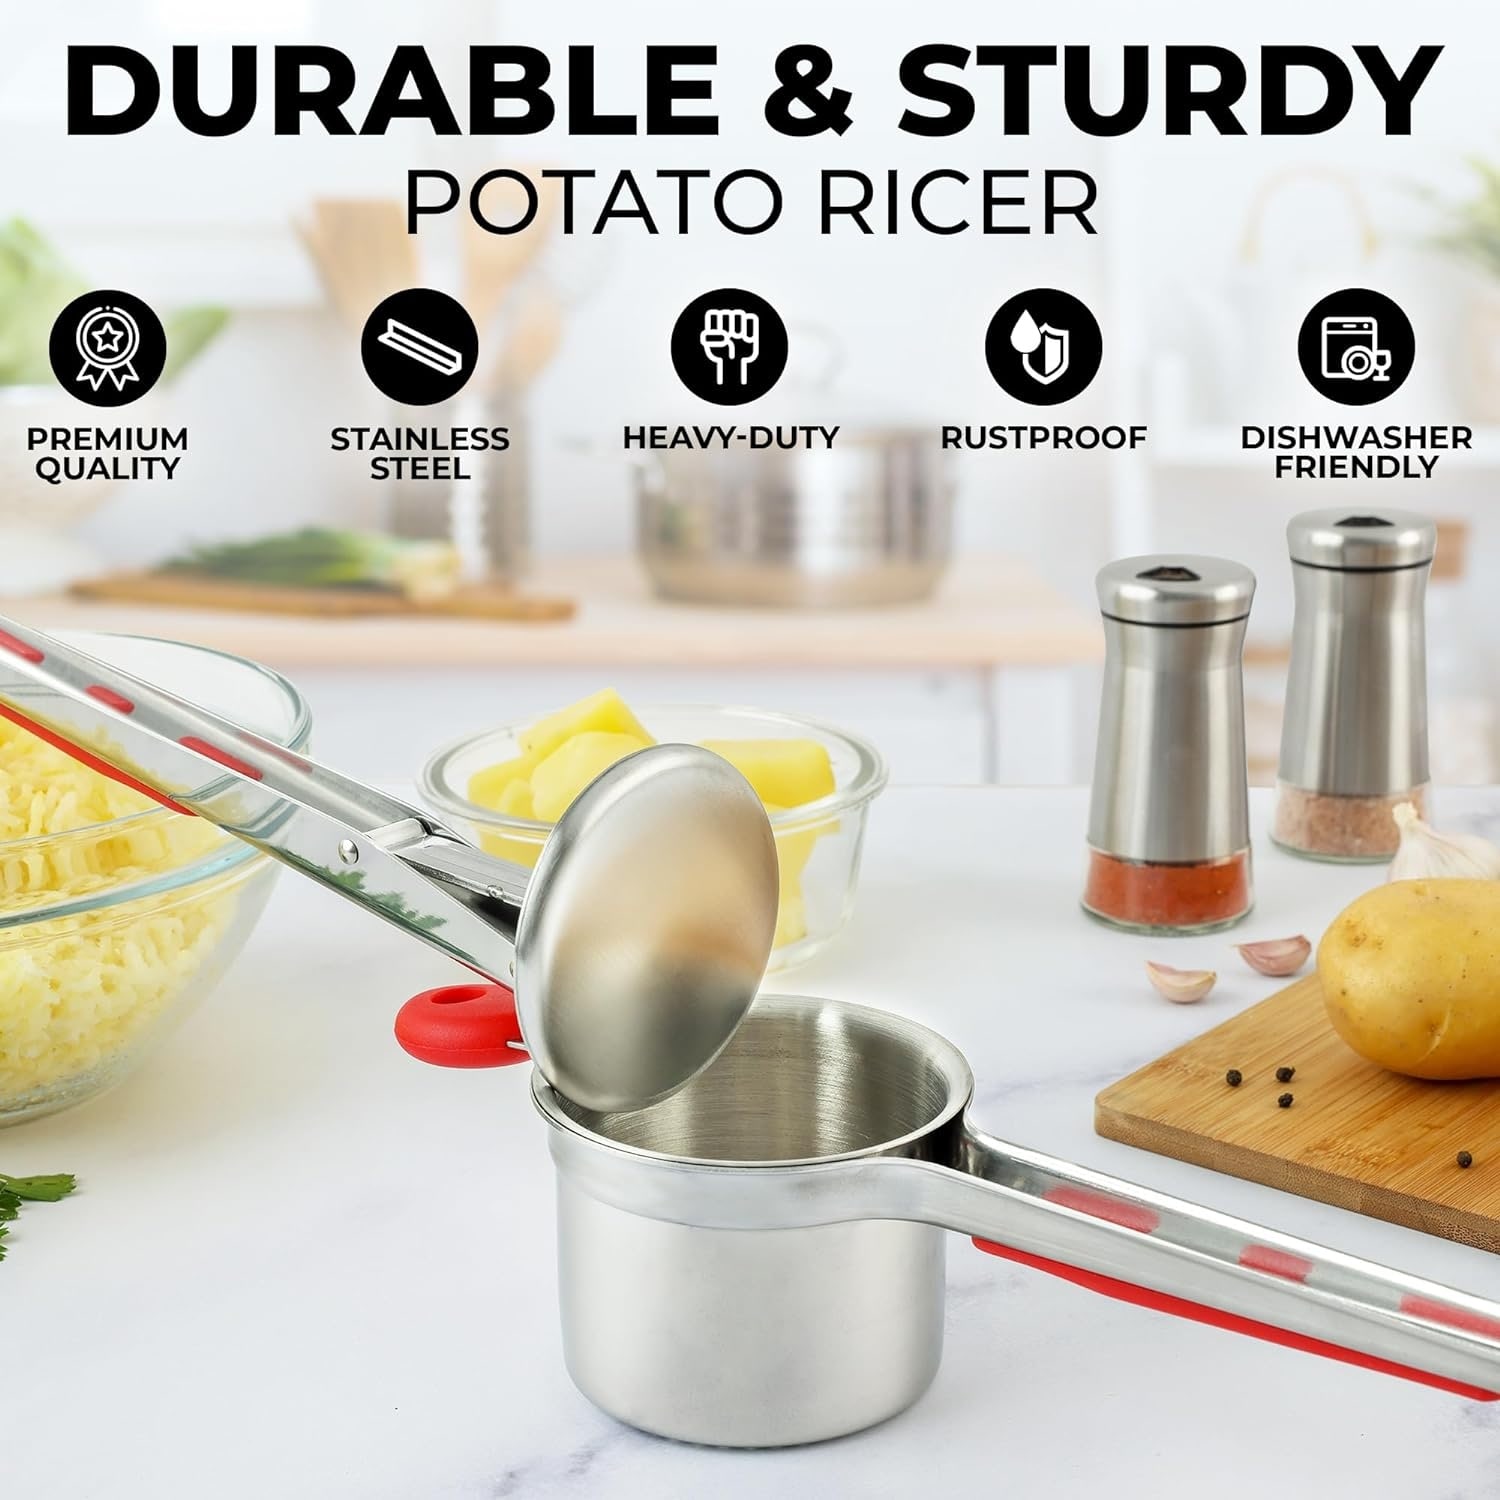 https://ak1.ostkcdn.com/images/products/is/images/direct/24f7a25c6f4bfbcf67c39a8b3d087d315693b335/Large-13.5oz-Potato-Ricer-with-3-Interchangeable-Discs.jpg